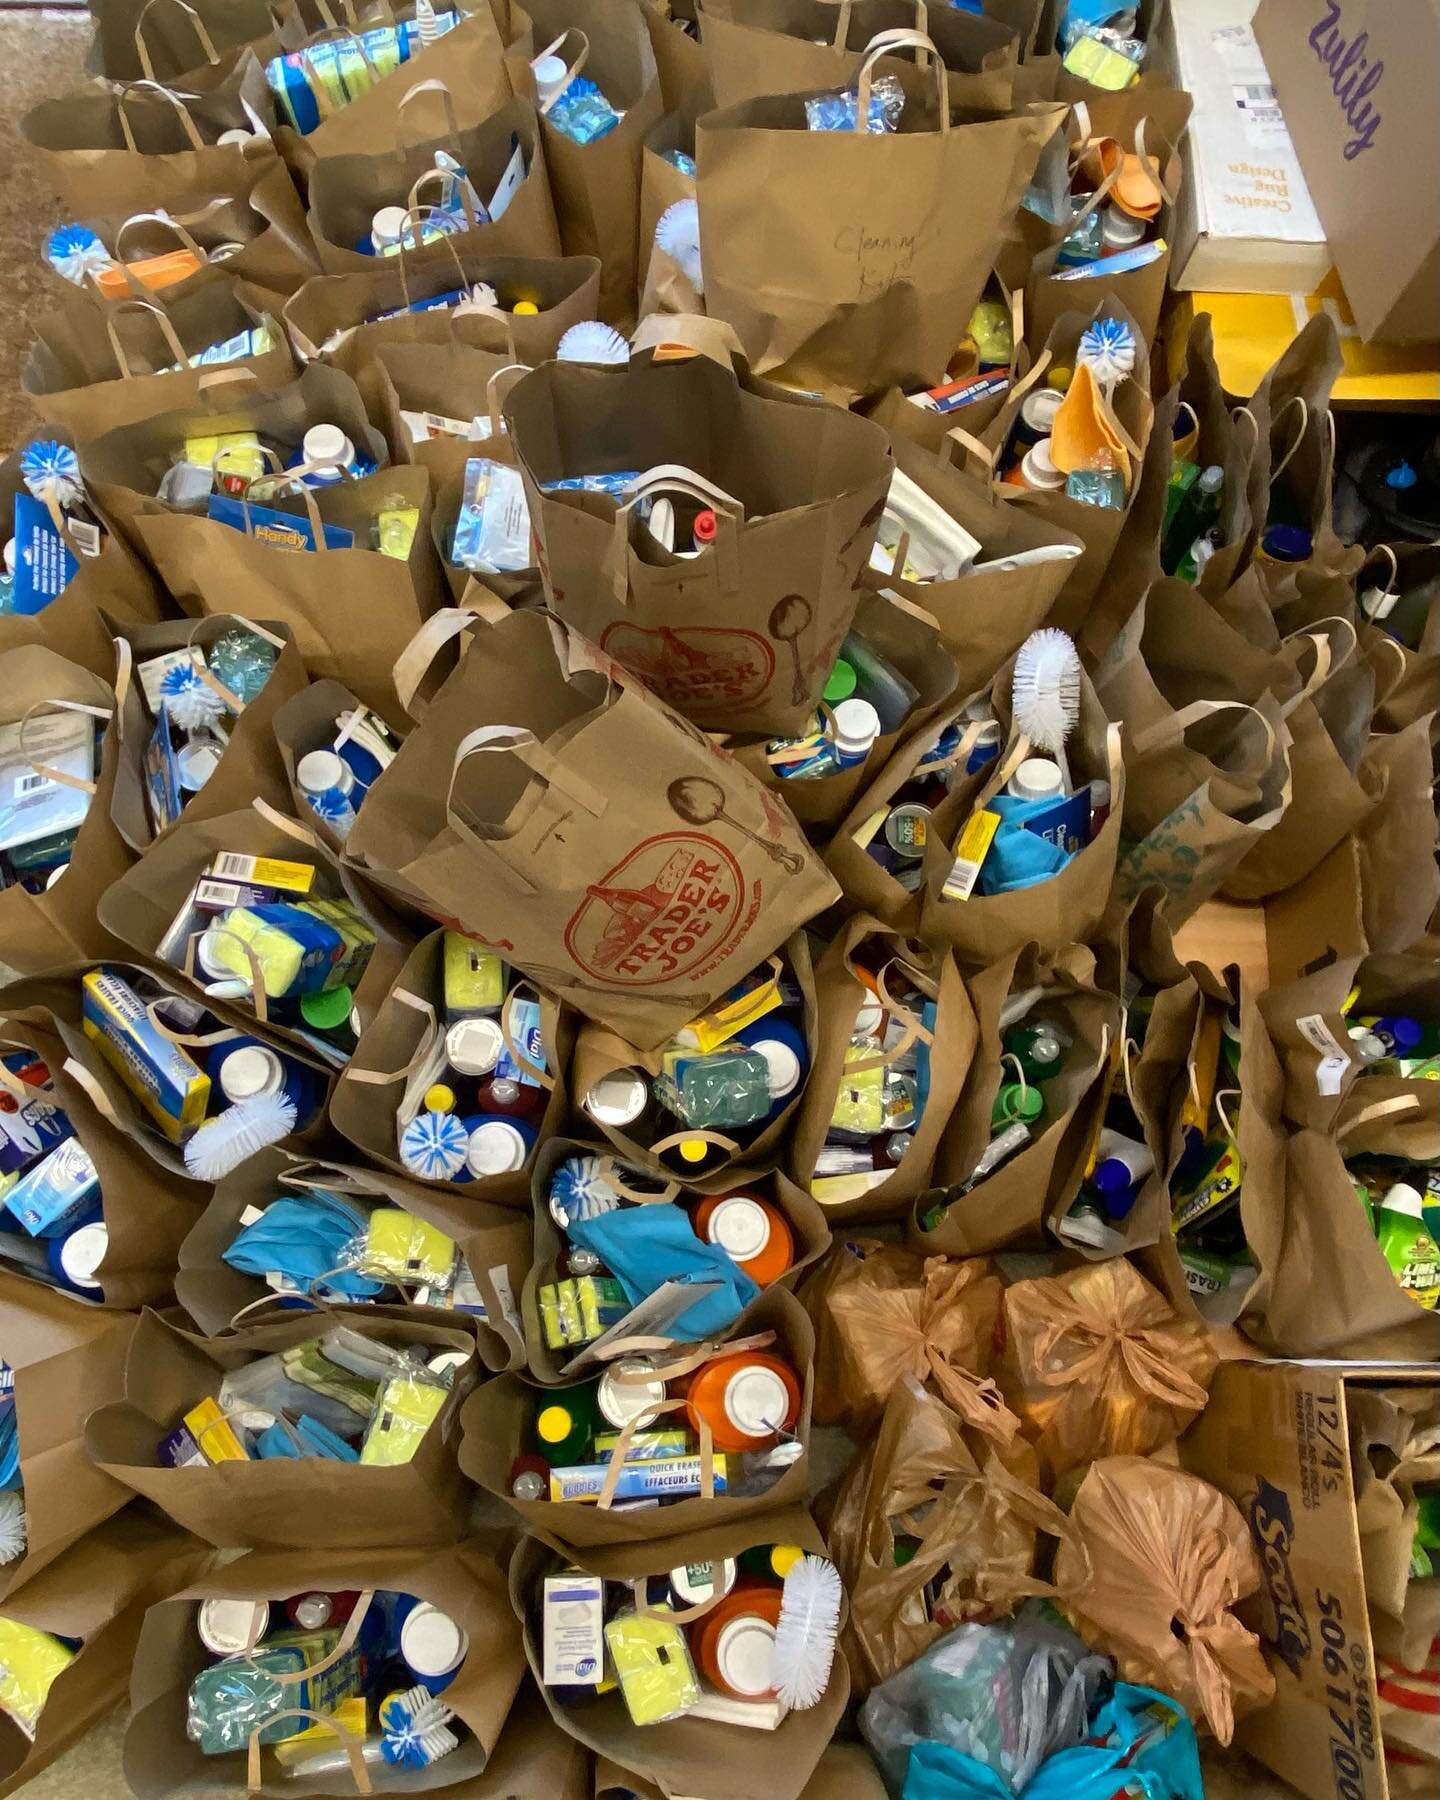 TFW you ask for cleaning kits, kids&rsquo; boots, and winter coats&mdash;and people STEP UP! 🥾🧣🧻 #maineneeds #portlandme #givingtuesday 
.
Visit -&gt; maineneeds.org to donate money, time, or winter gear!